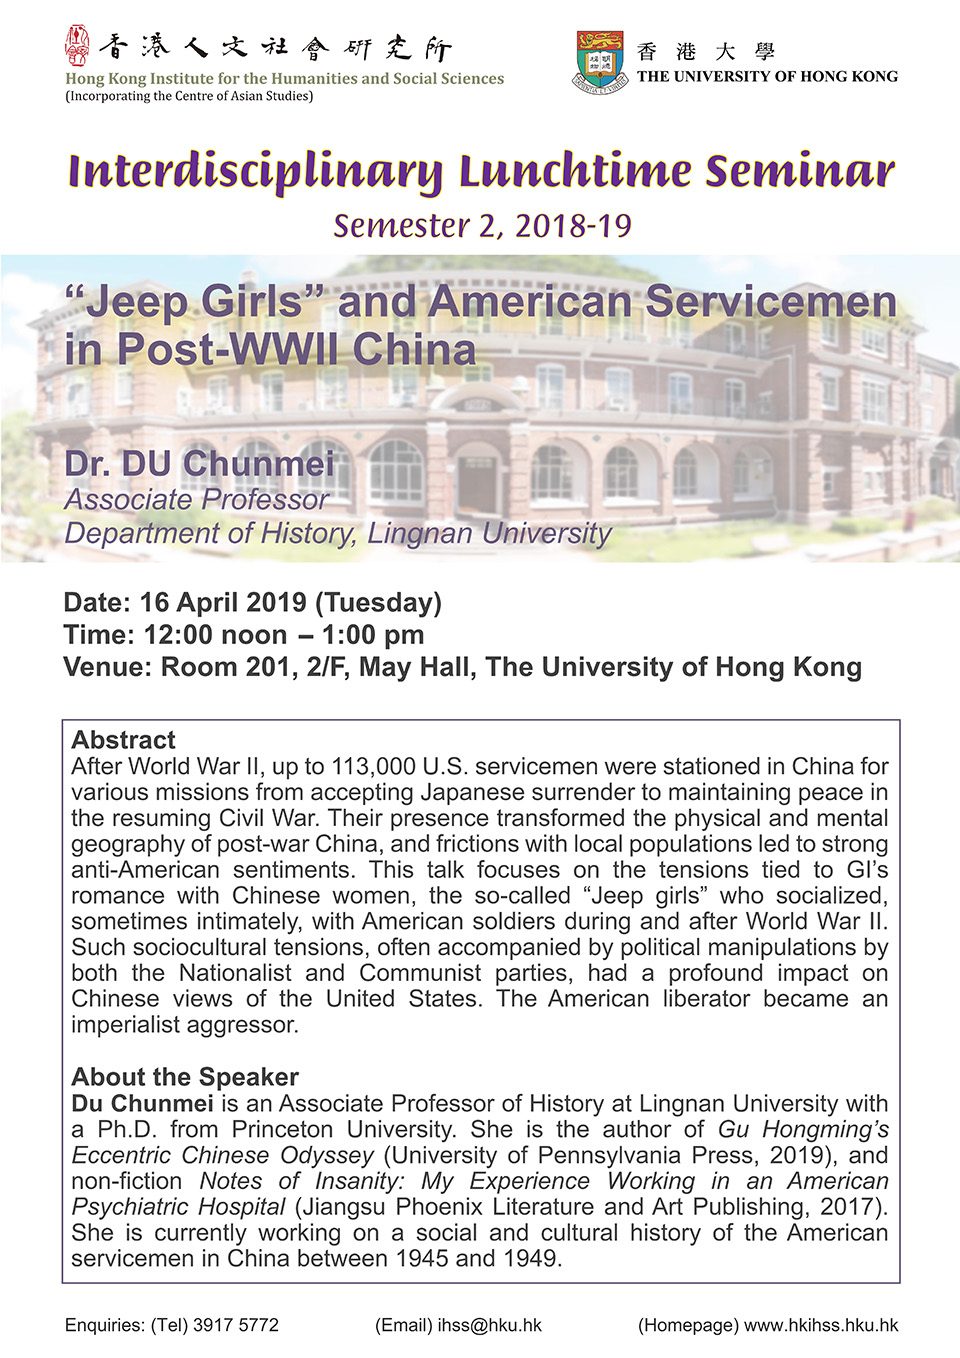 Interdisciplinary Lunchtime Seminar on ““Jeep Girls” and American Servicemen in Post-WWII China” by Dr. Du Chunmei (April 16, 2019)